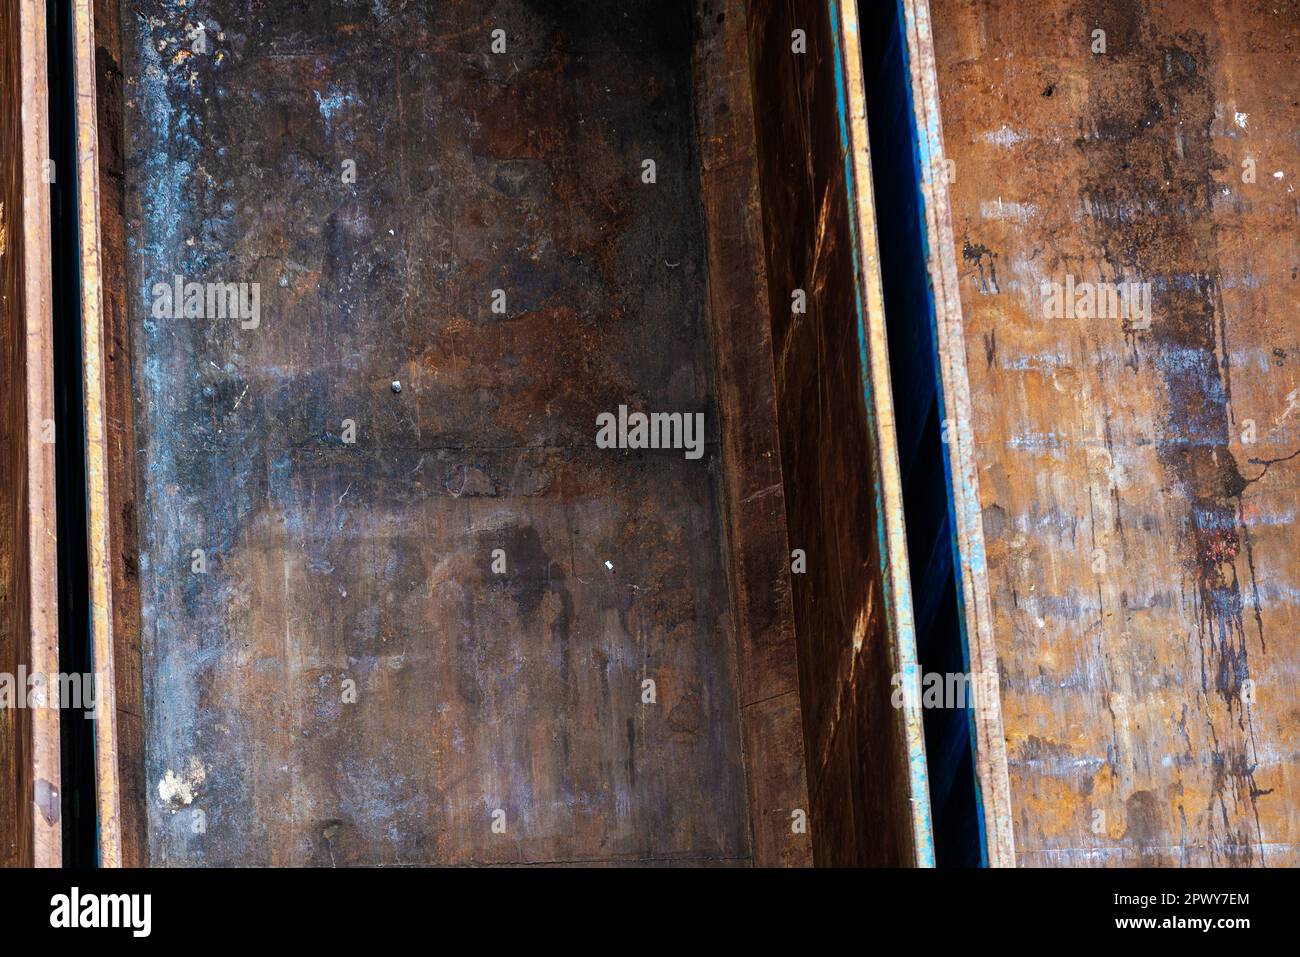 Overview of an old rusty container as abstract background Stock Photo